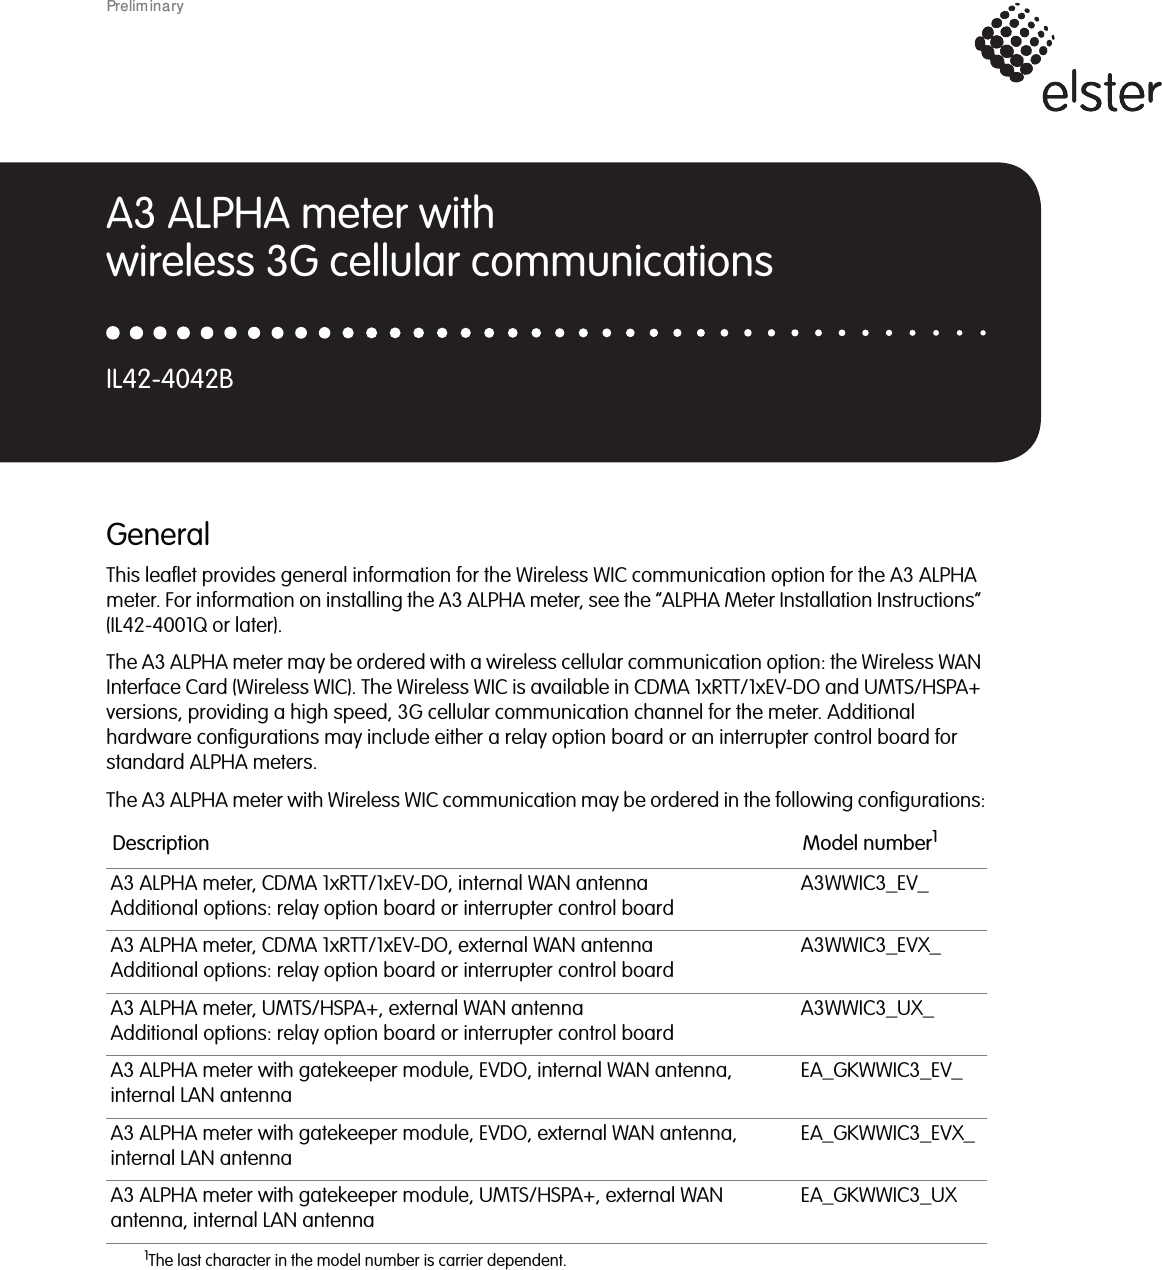 GeneralThis leaflet provides general information for the Wireless WIC communication option for the A3 ALPHAmeter. For information on installing the A3 ALPHA meter, see the “ALPHA Meter Installation Instructions”(IL42-4001Q or later).The A3 ALPHA meter may be ordered with a wireless cellular communication option: the Wireless WANInterface Card (Wireless WIC). The Wireless WIC is available in CDMA 1xRTT/1xEV-DO and UMTS/HSPA+versions, providing a high speed, 3G cellular communication channel for the meter. Additionalhardware configurations may include either a relay option board or an interrupter control board forstandard ALPHA meters.The A3 ALPHA meter with Wireless WIC communication may be ordered in the following configurations:Description Model number11The last character in the model number is carrier dependent.A3 ALPHA meter, CDMA 1xRTT/1xEV-DO, internal WAN antennaAdditional options: relay option board or interrupter control boardA3WWIC3_EV_A3 ALPHA meter, CDMA 1xRTT/1xEV-DO, external WAN antennaAdditional options: relay option board or interrupter control boardA3WWIC3_EVX_A3 ALPHA meter, UMTS/HSPA+, external WAN antennaAdditional options: relay option board or interrupter control boardA3WWIC3_UX_A3 ALPHA meter with gatekeeper module, EVDO, internal WAN antenna,internal LAN antennaEA_GKWWIC3_EV_A3 ALPHA meter with gatekeeper module, EVDO, external WAN antenna,internal LAN antennaEA_GKWWIC3_EVX_A3 ALPHA meter with gatekeeper module, UMTS/HSPA+, external WANantenna, internal LAN antennaEA_GKWWIC3_UXA3 ALPHA meter withwireless 3G cellular communicationsIL42-4042BPrelim inary